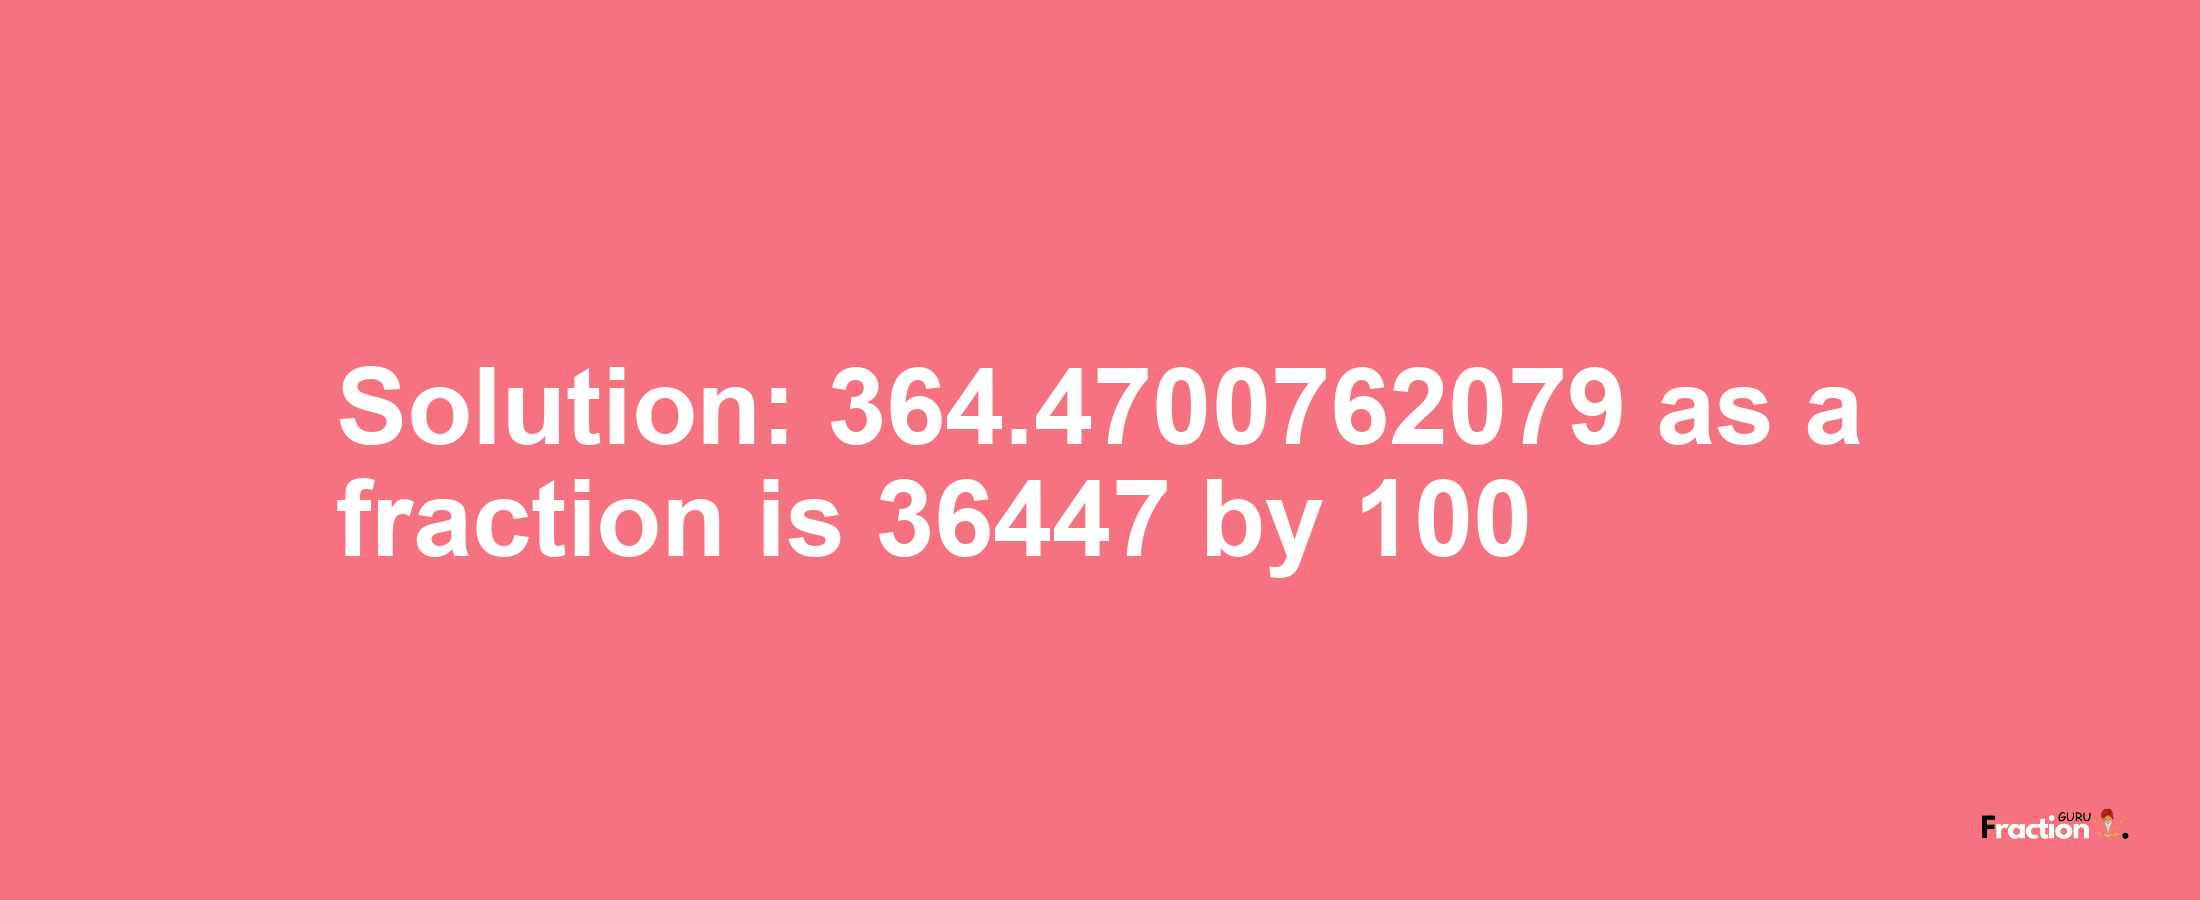 Solution:364.4700762079 as a fraction is 36447/100